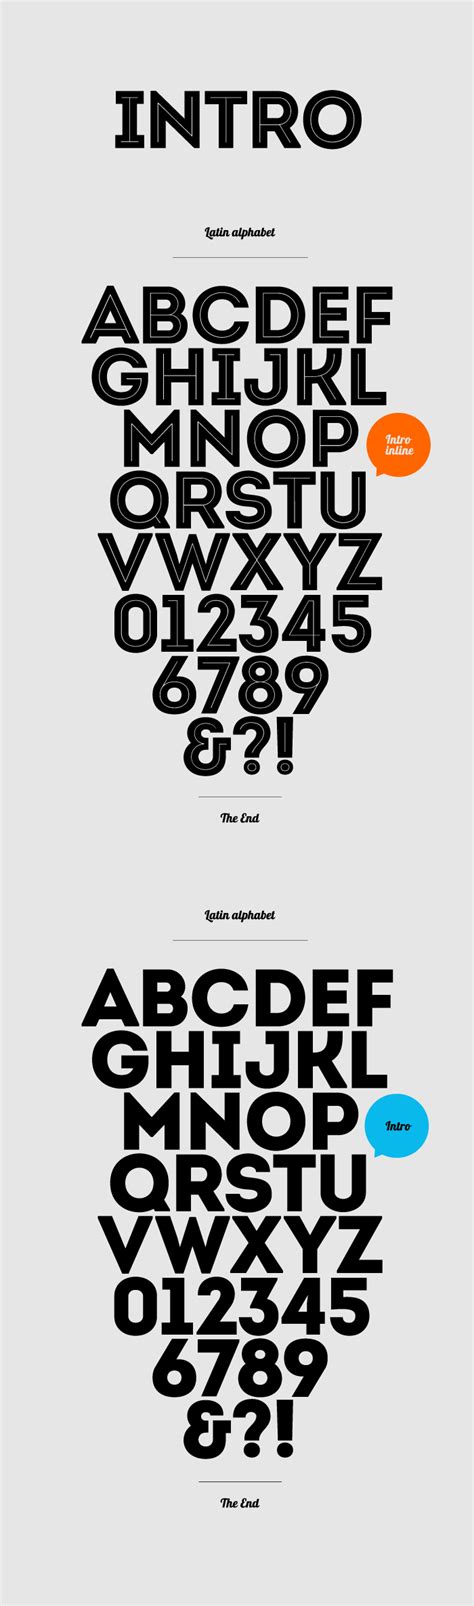 great  fonts   designs designer daily graphic  web